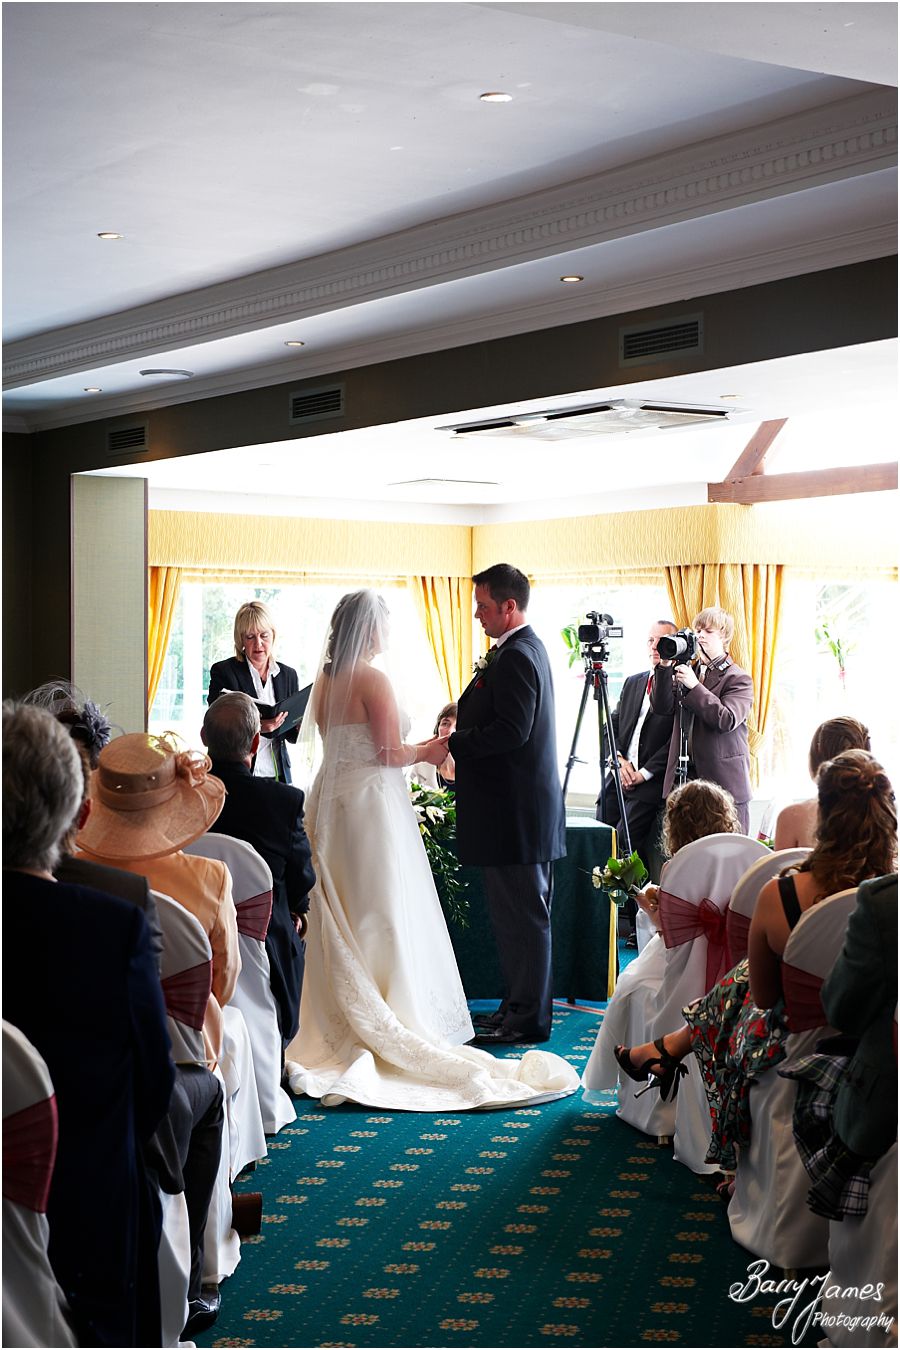 Creative wedding photographers at The Moat House in Acton Trussell by Venue Recommended Wedding Photographer Barry James